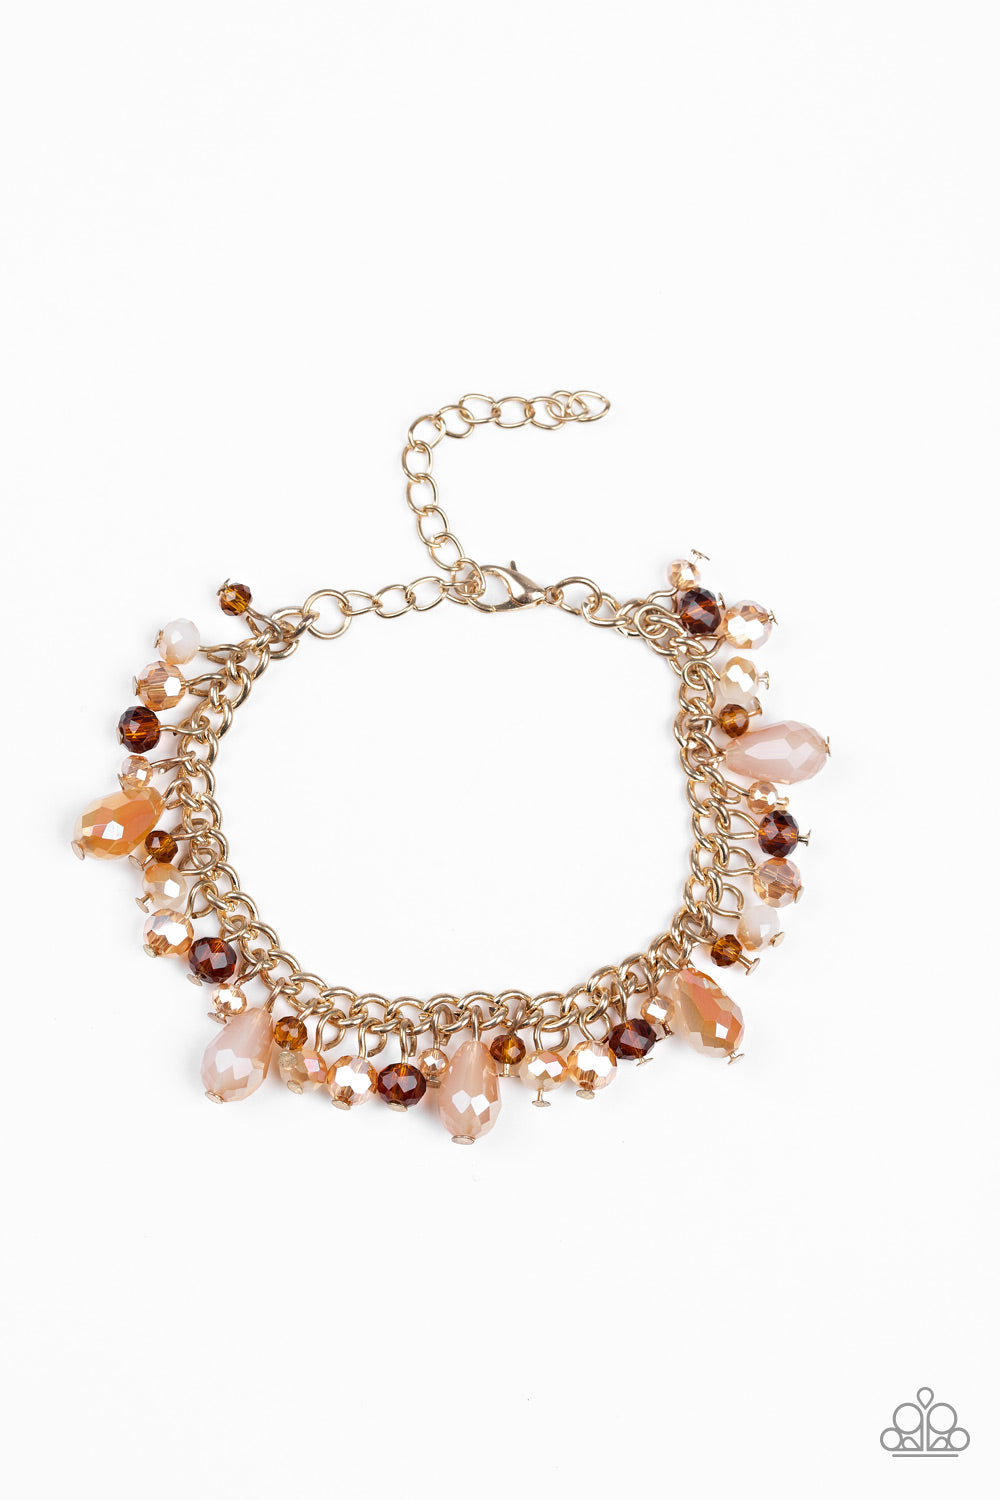 Courageously Catwalk Gold Paparazzi Necklace Cashmere Pink Jewels - Cashmere Pink Jewels & Accessories, Cashmere Pink Jewels & Accessories - Paparazzi